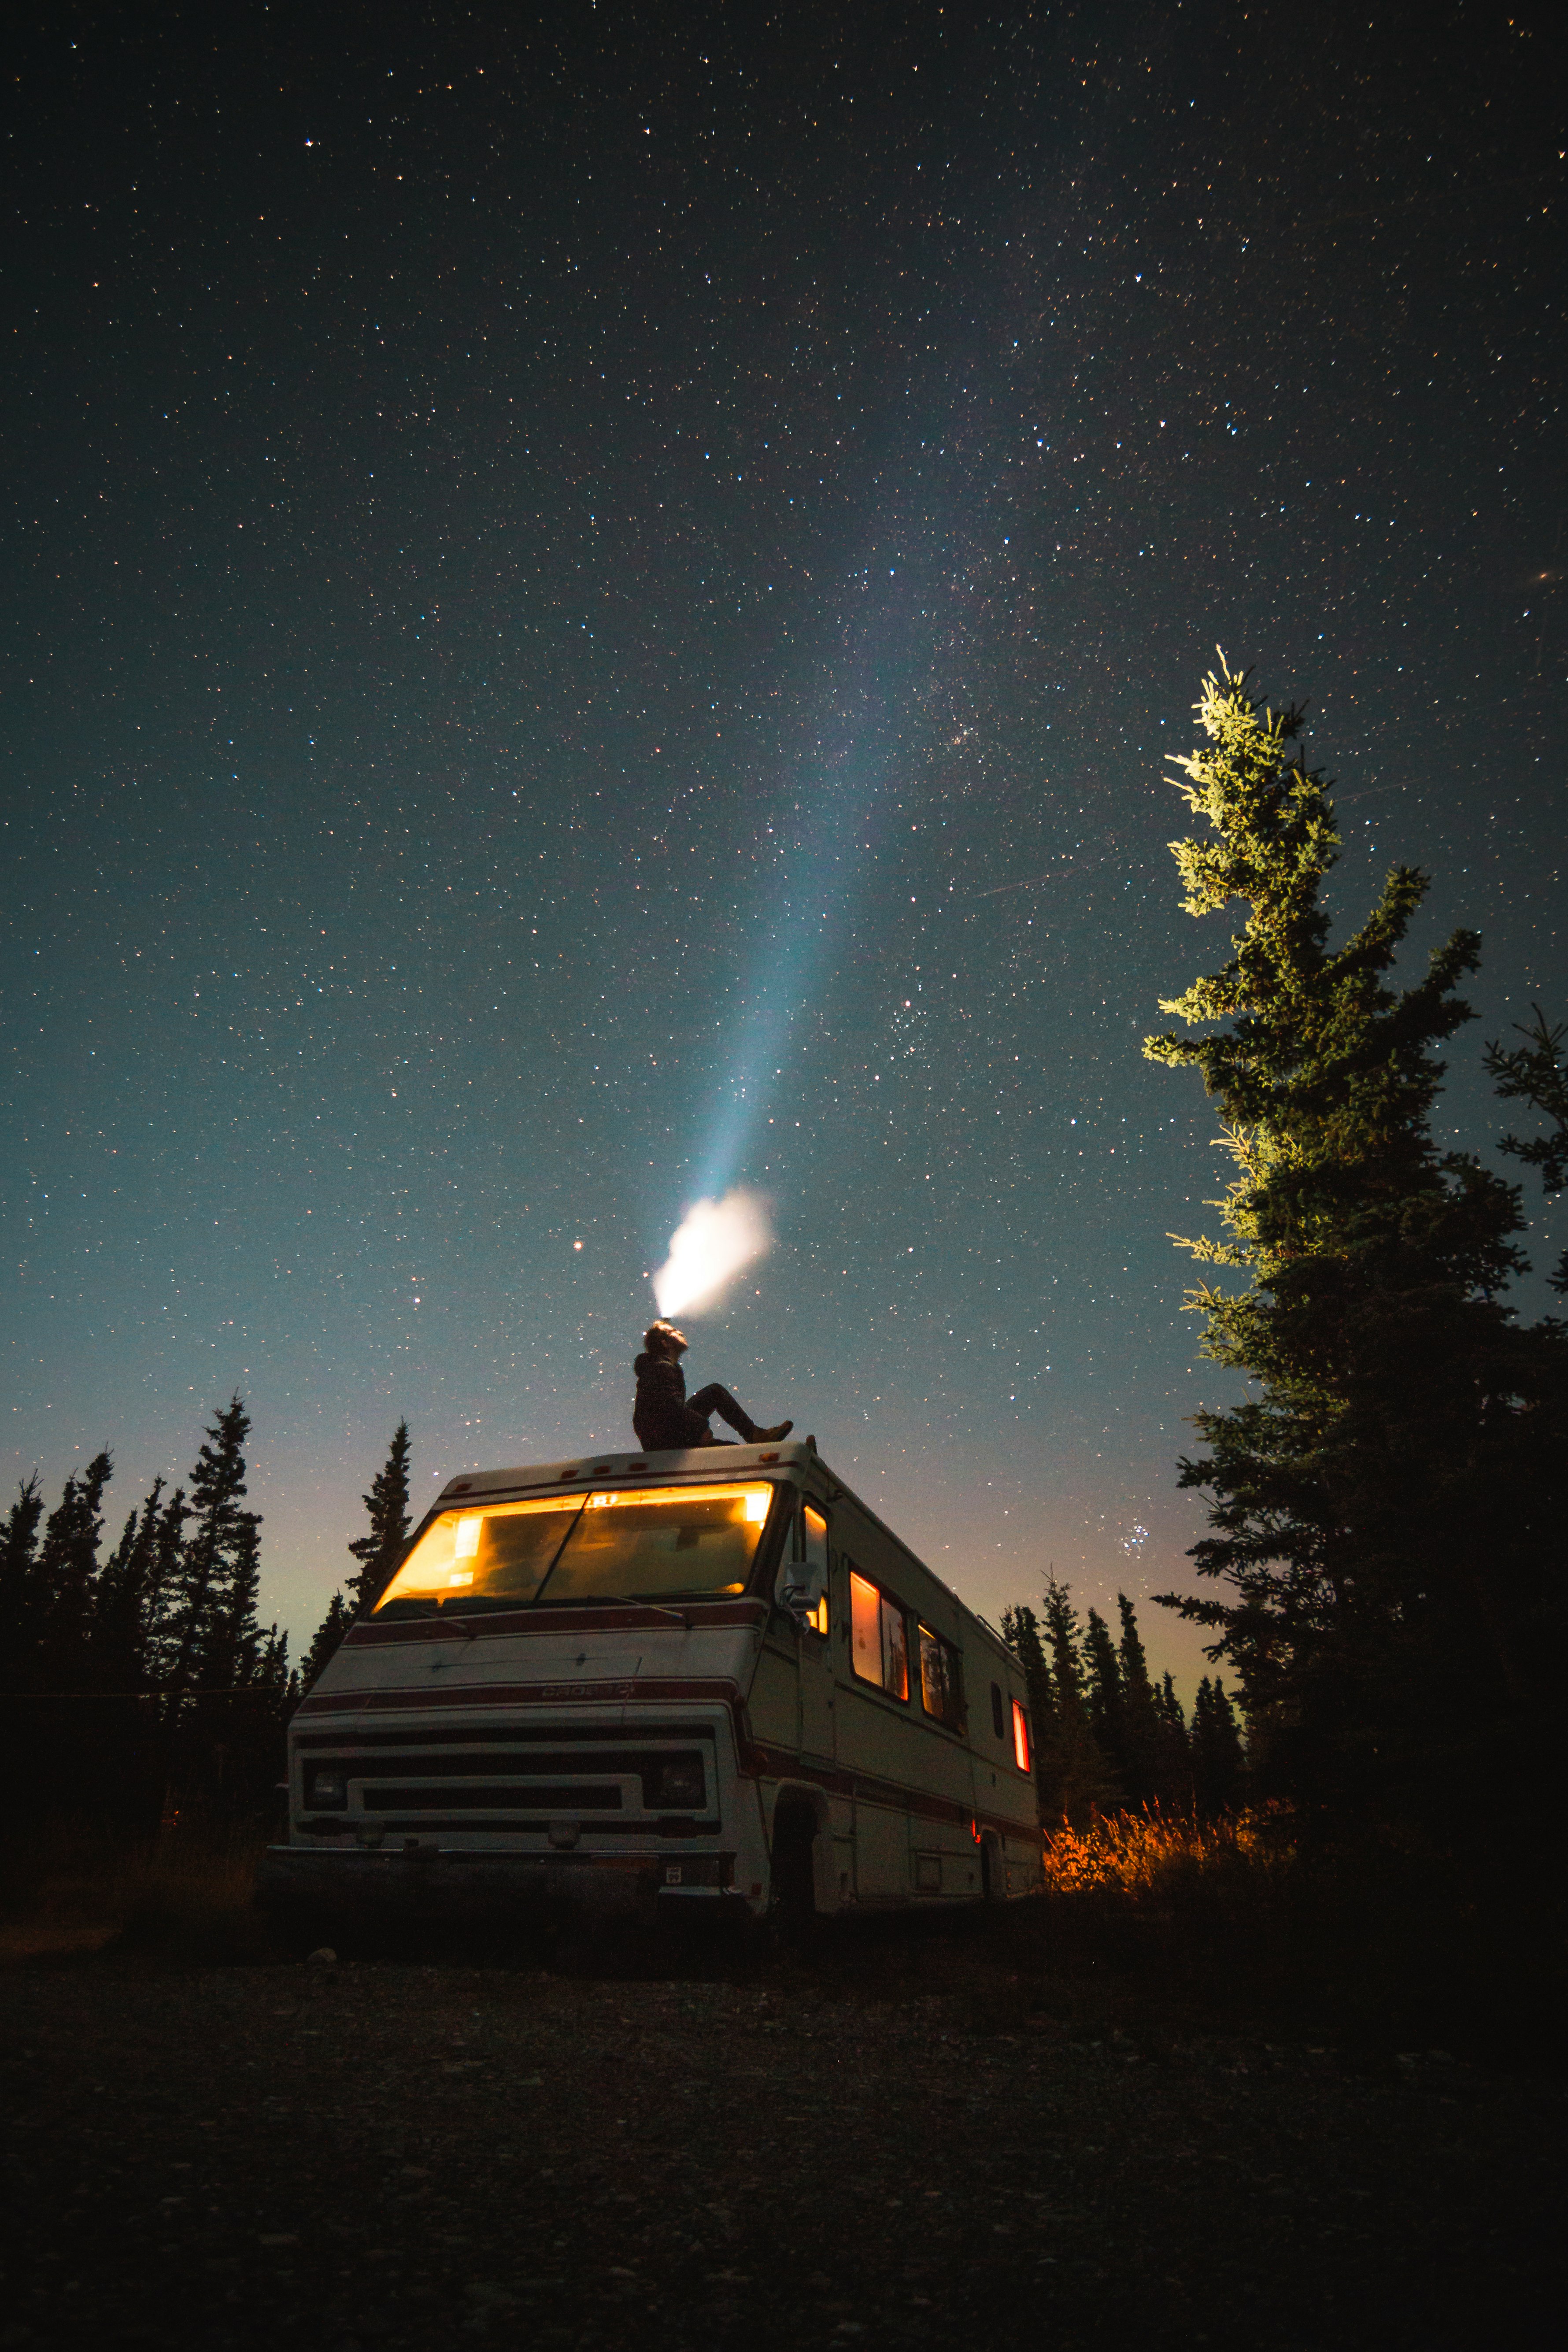 person sits on top of van at night